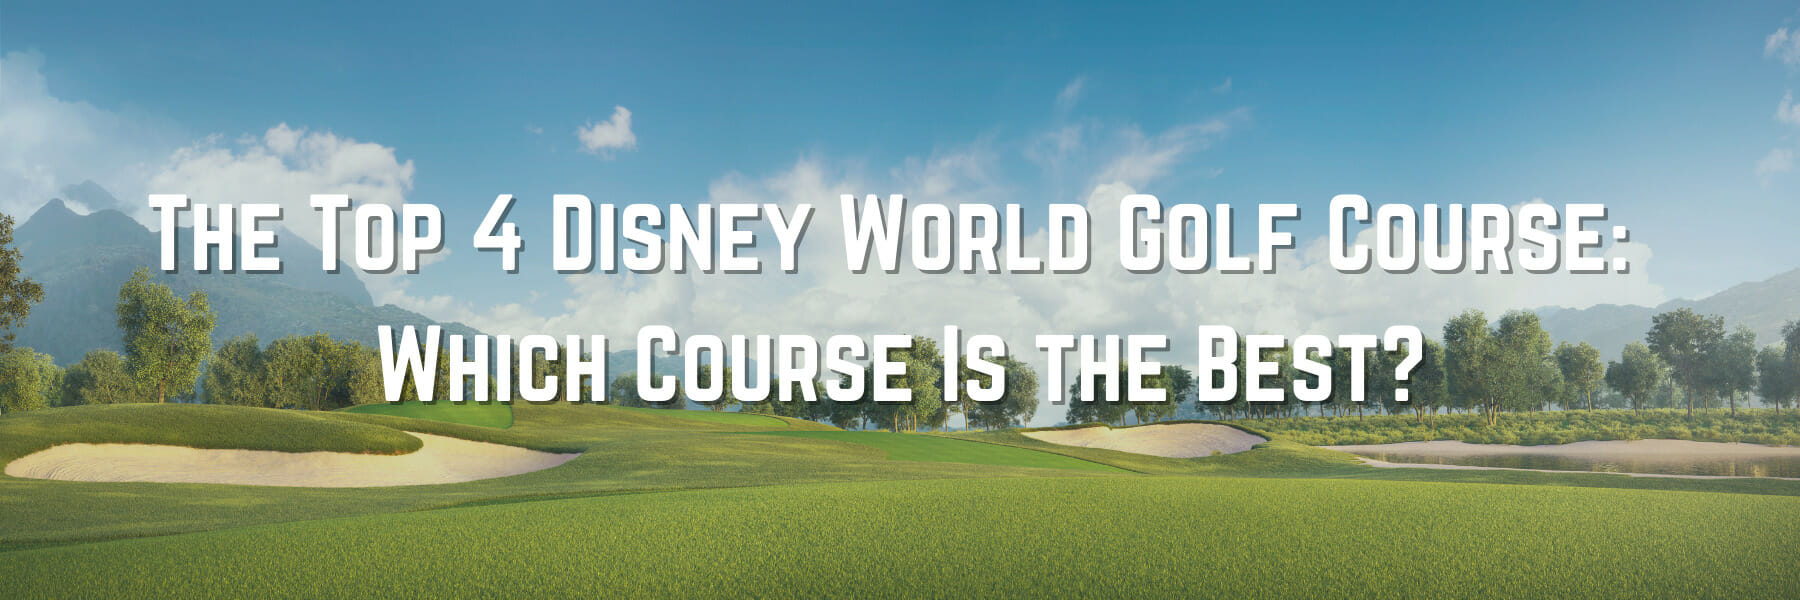 The Top 4 Disney World Golf Courses: Which Course Is the Best?